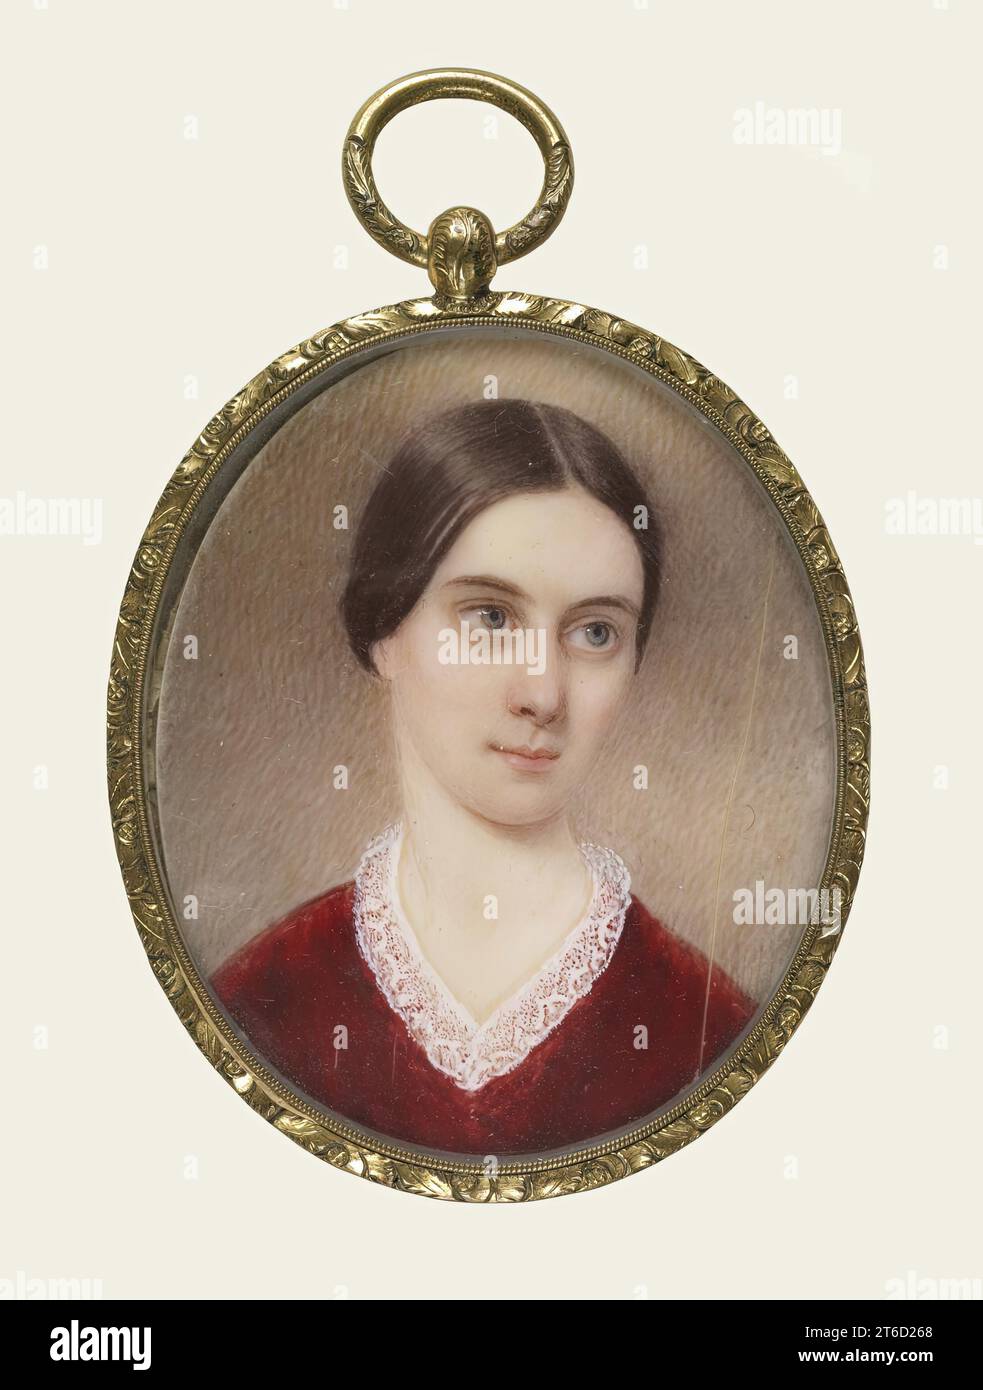 Sarah Goodridge, c1835. Portrait said to be of American miniaturist Sarah Goodridge (also spelt Goodrich, 1788-1853) looking slightly to the left, with dark brown straight hair parted in the centre, wearing a red velvet dress with narrow white lace collar. Stock Photo